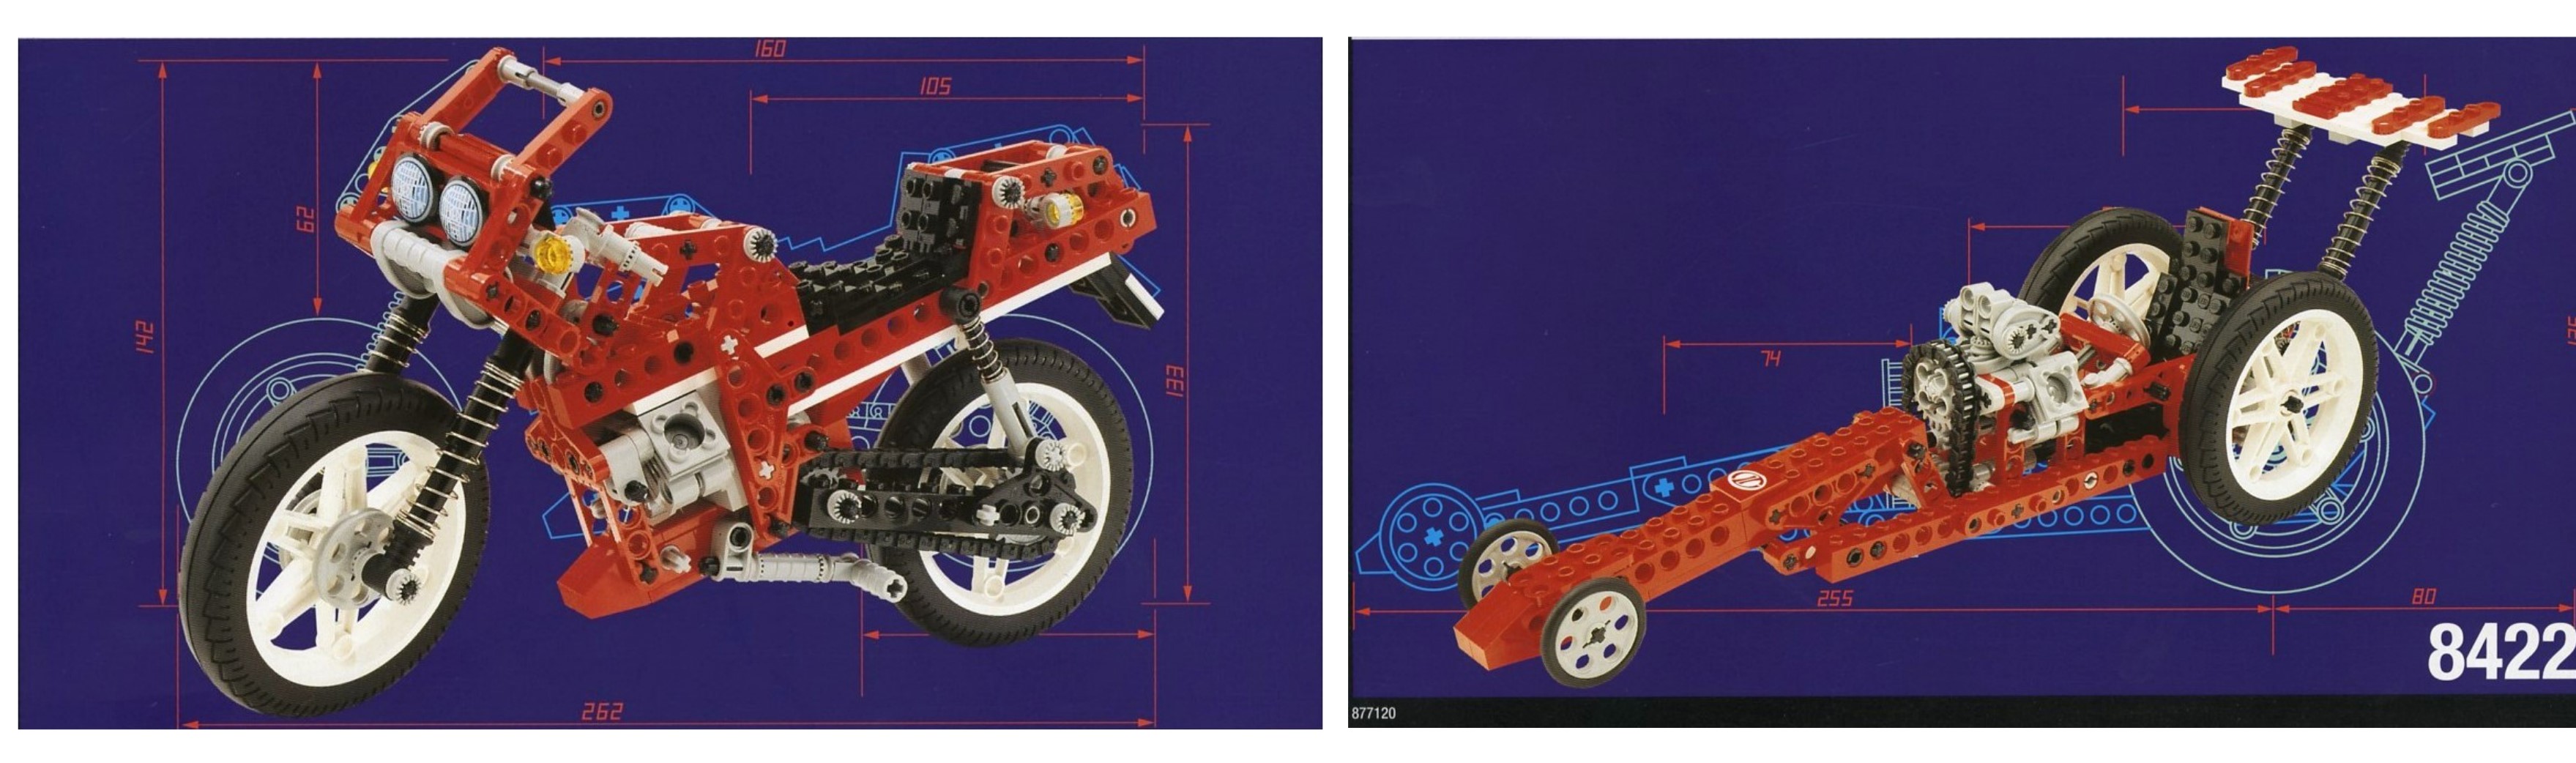 30 years of Technic motorcycles